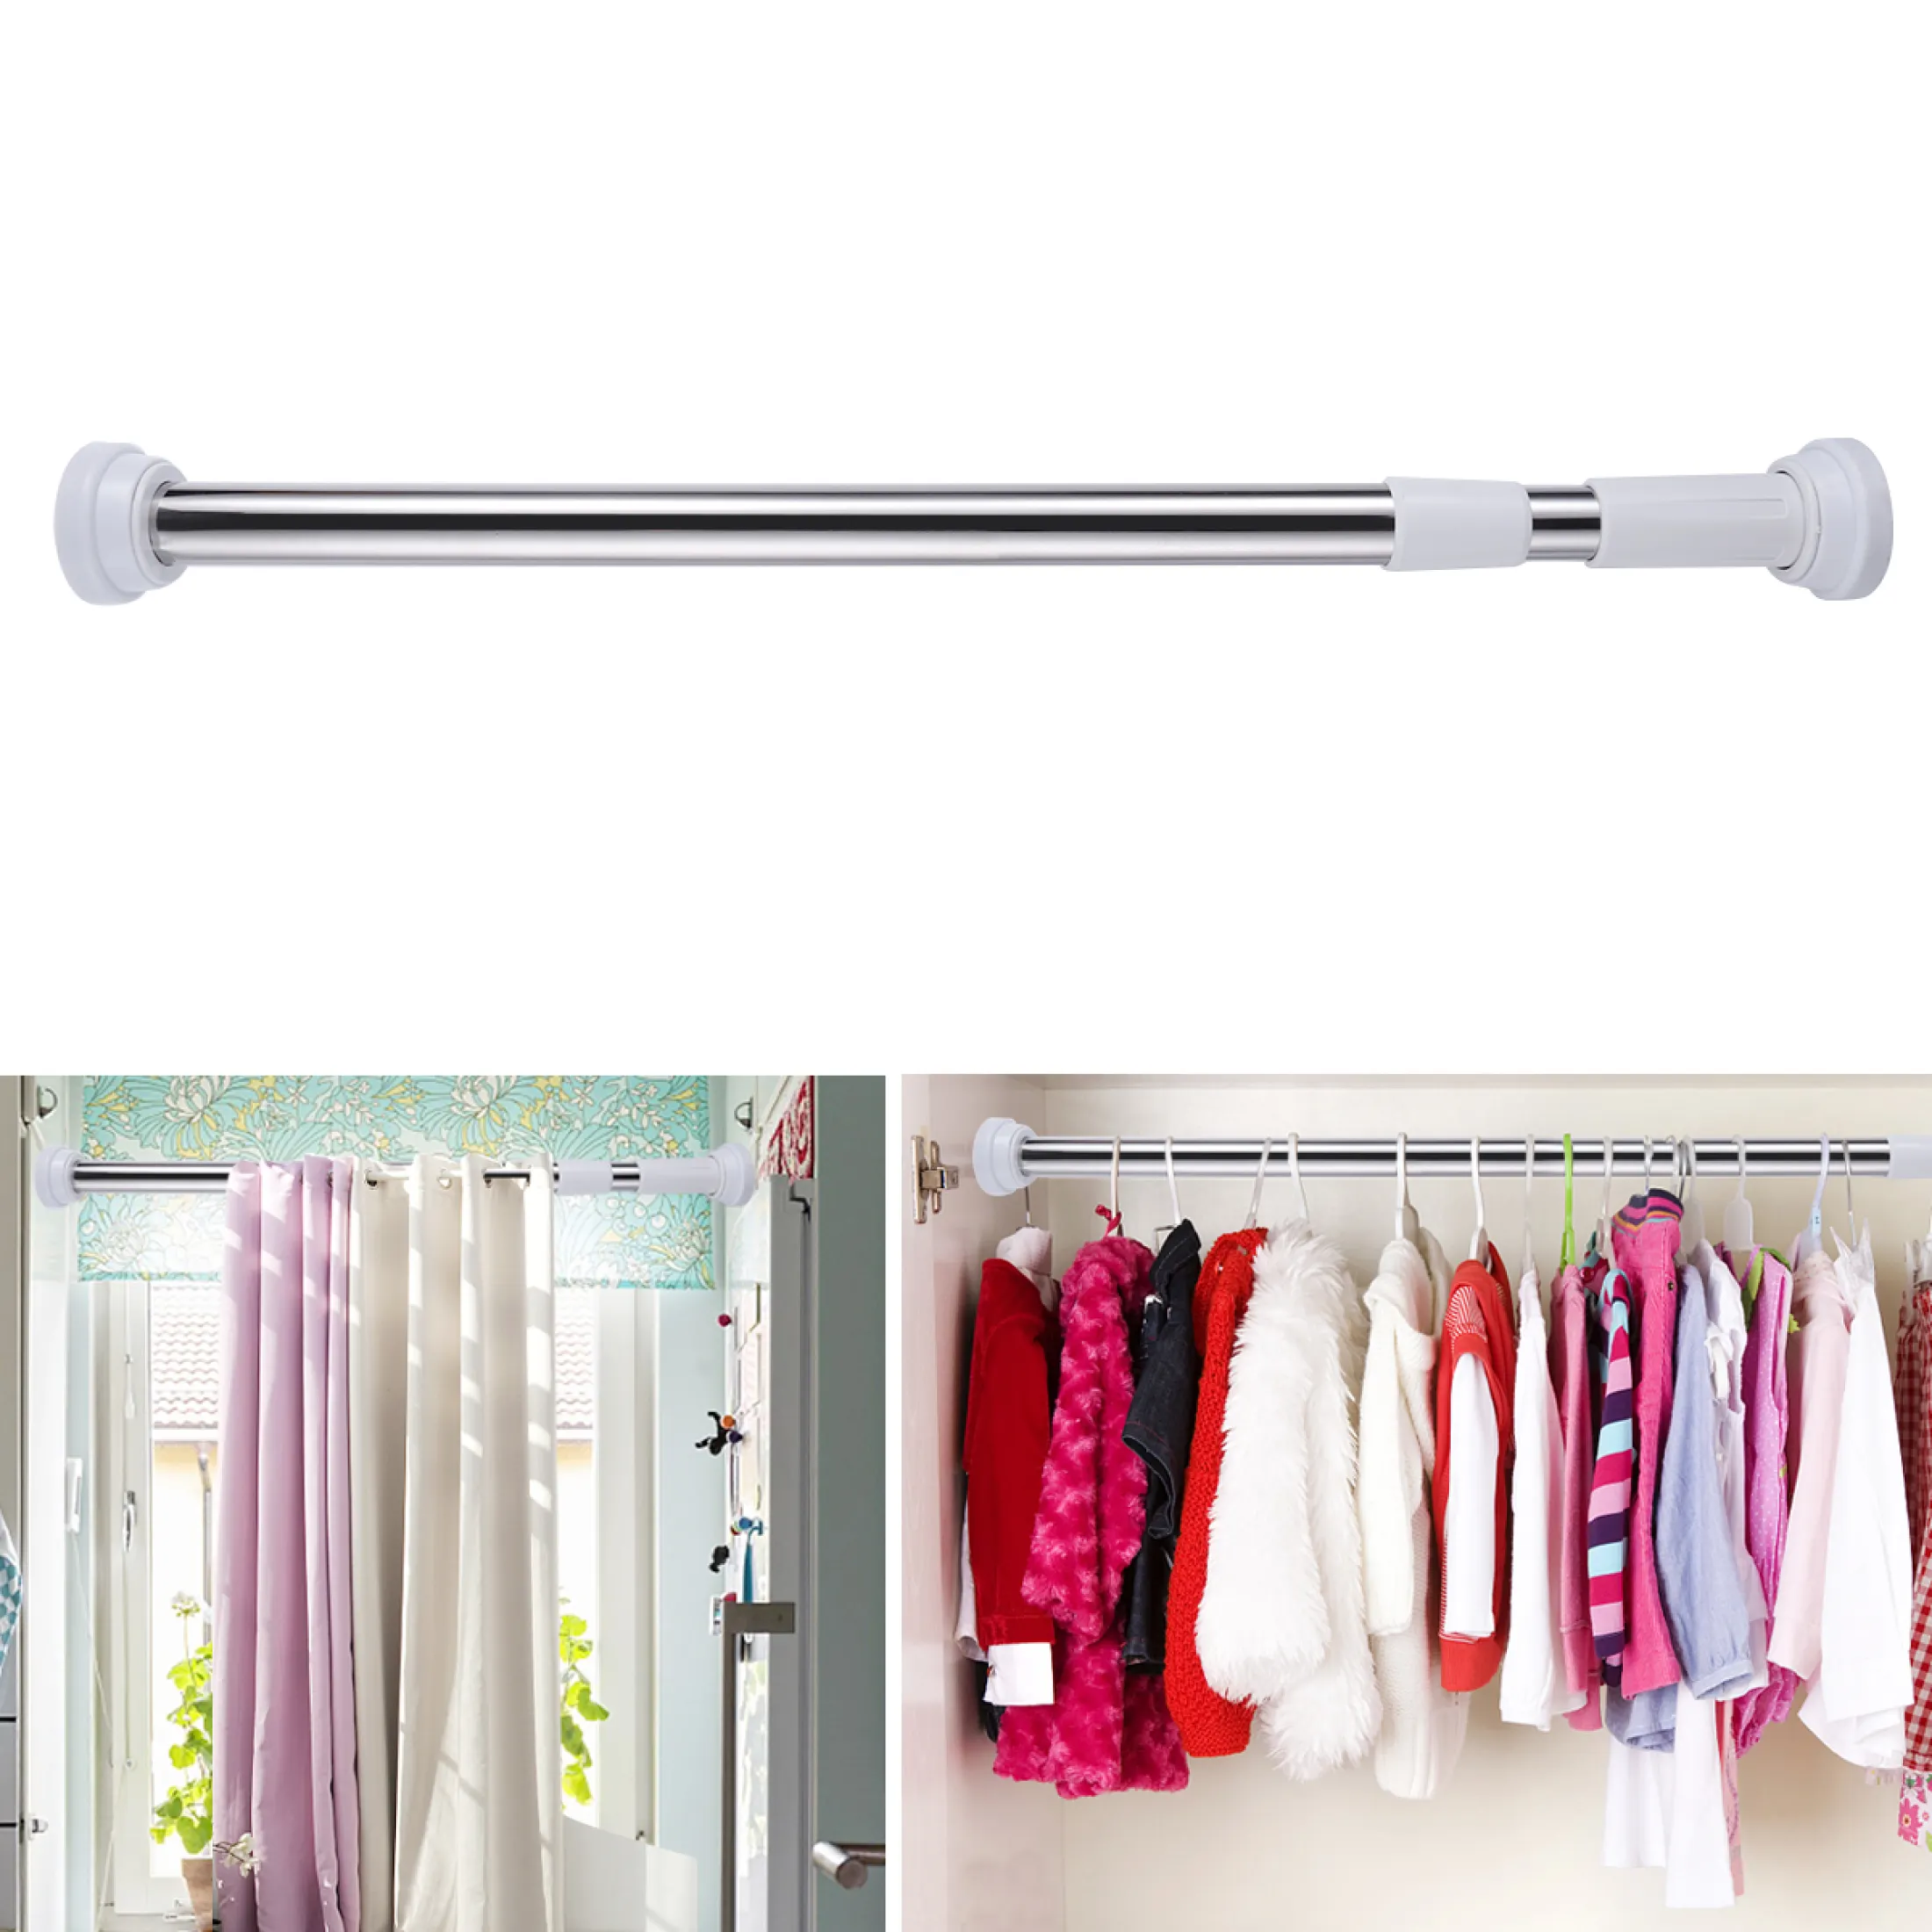 Stainless Steel Bathroom Shower Curtain, How To Fix A Shower Curtain Tension Rod